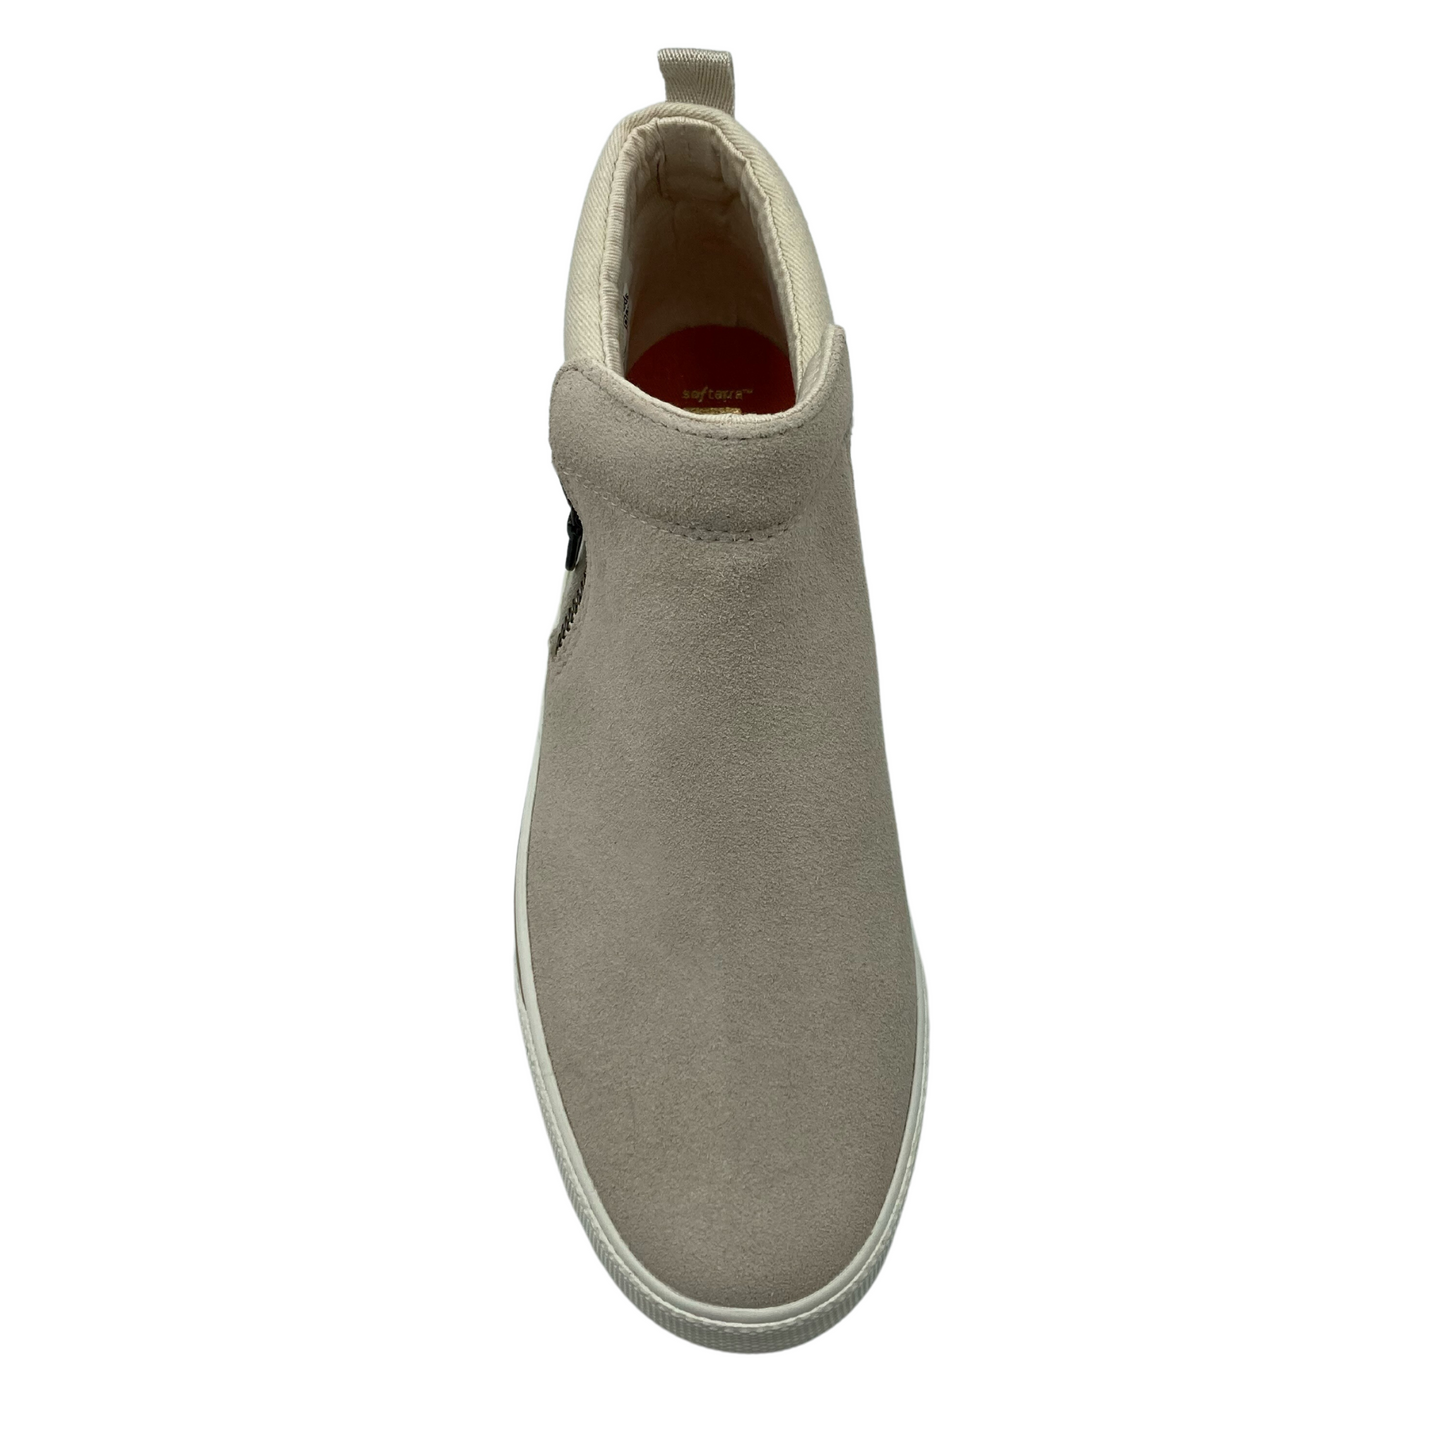 Top view of latte suede bootie with rounded toe and side zipper closure